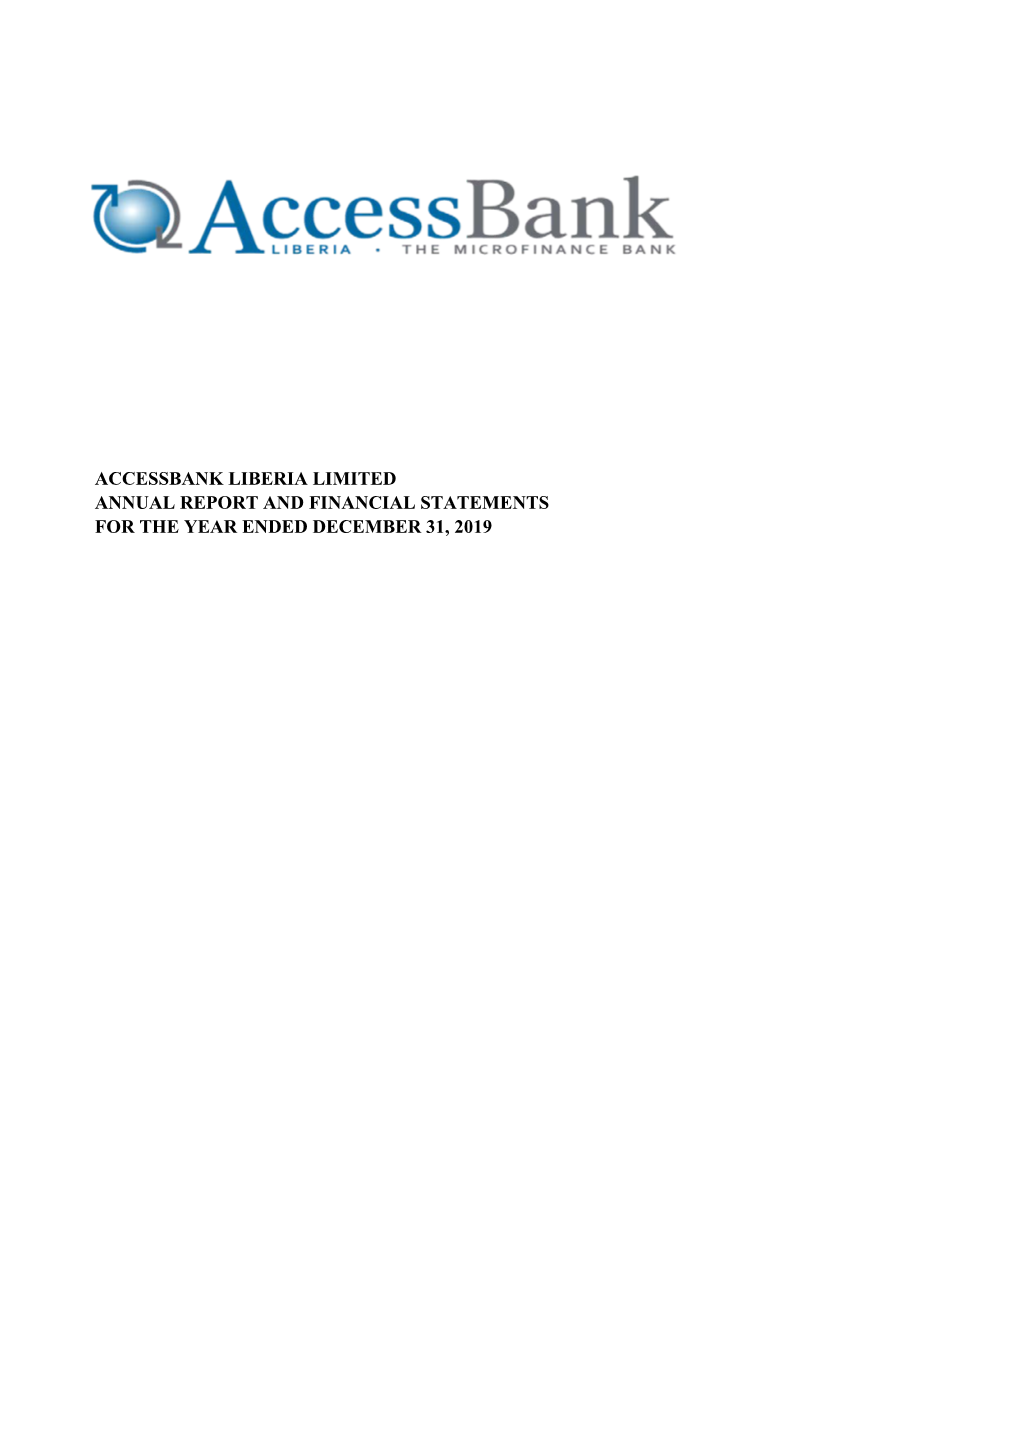 Accessbank Liberia Limited Annual Report and Financial Statements for the Year Ended December 31, 2019